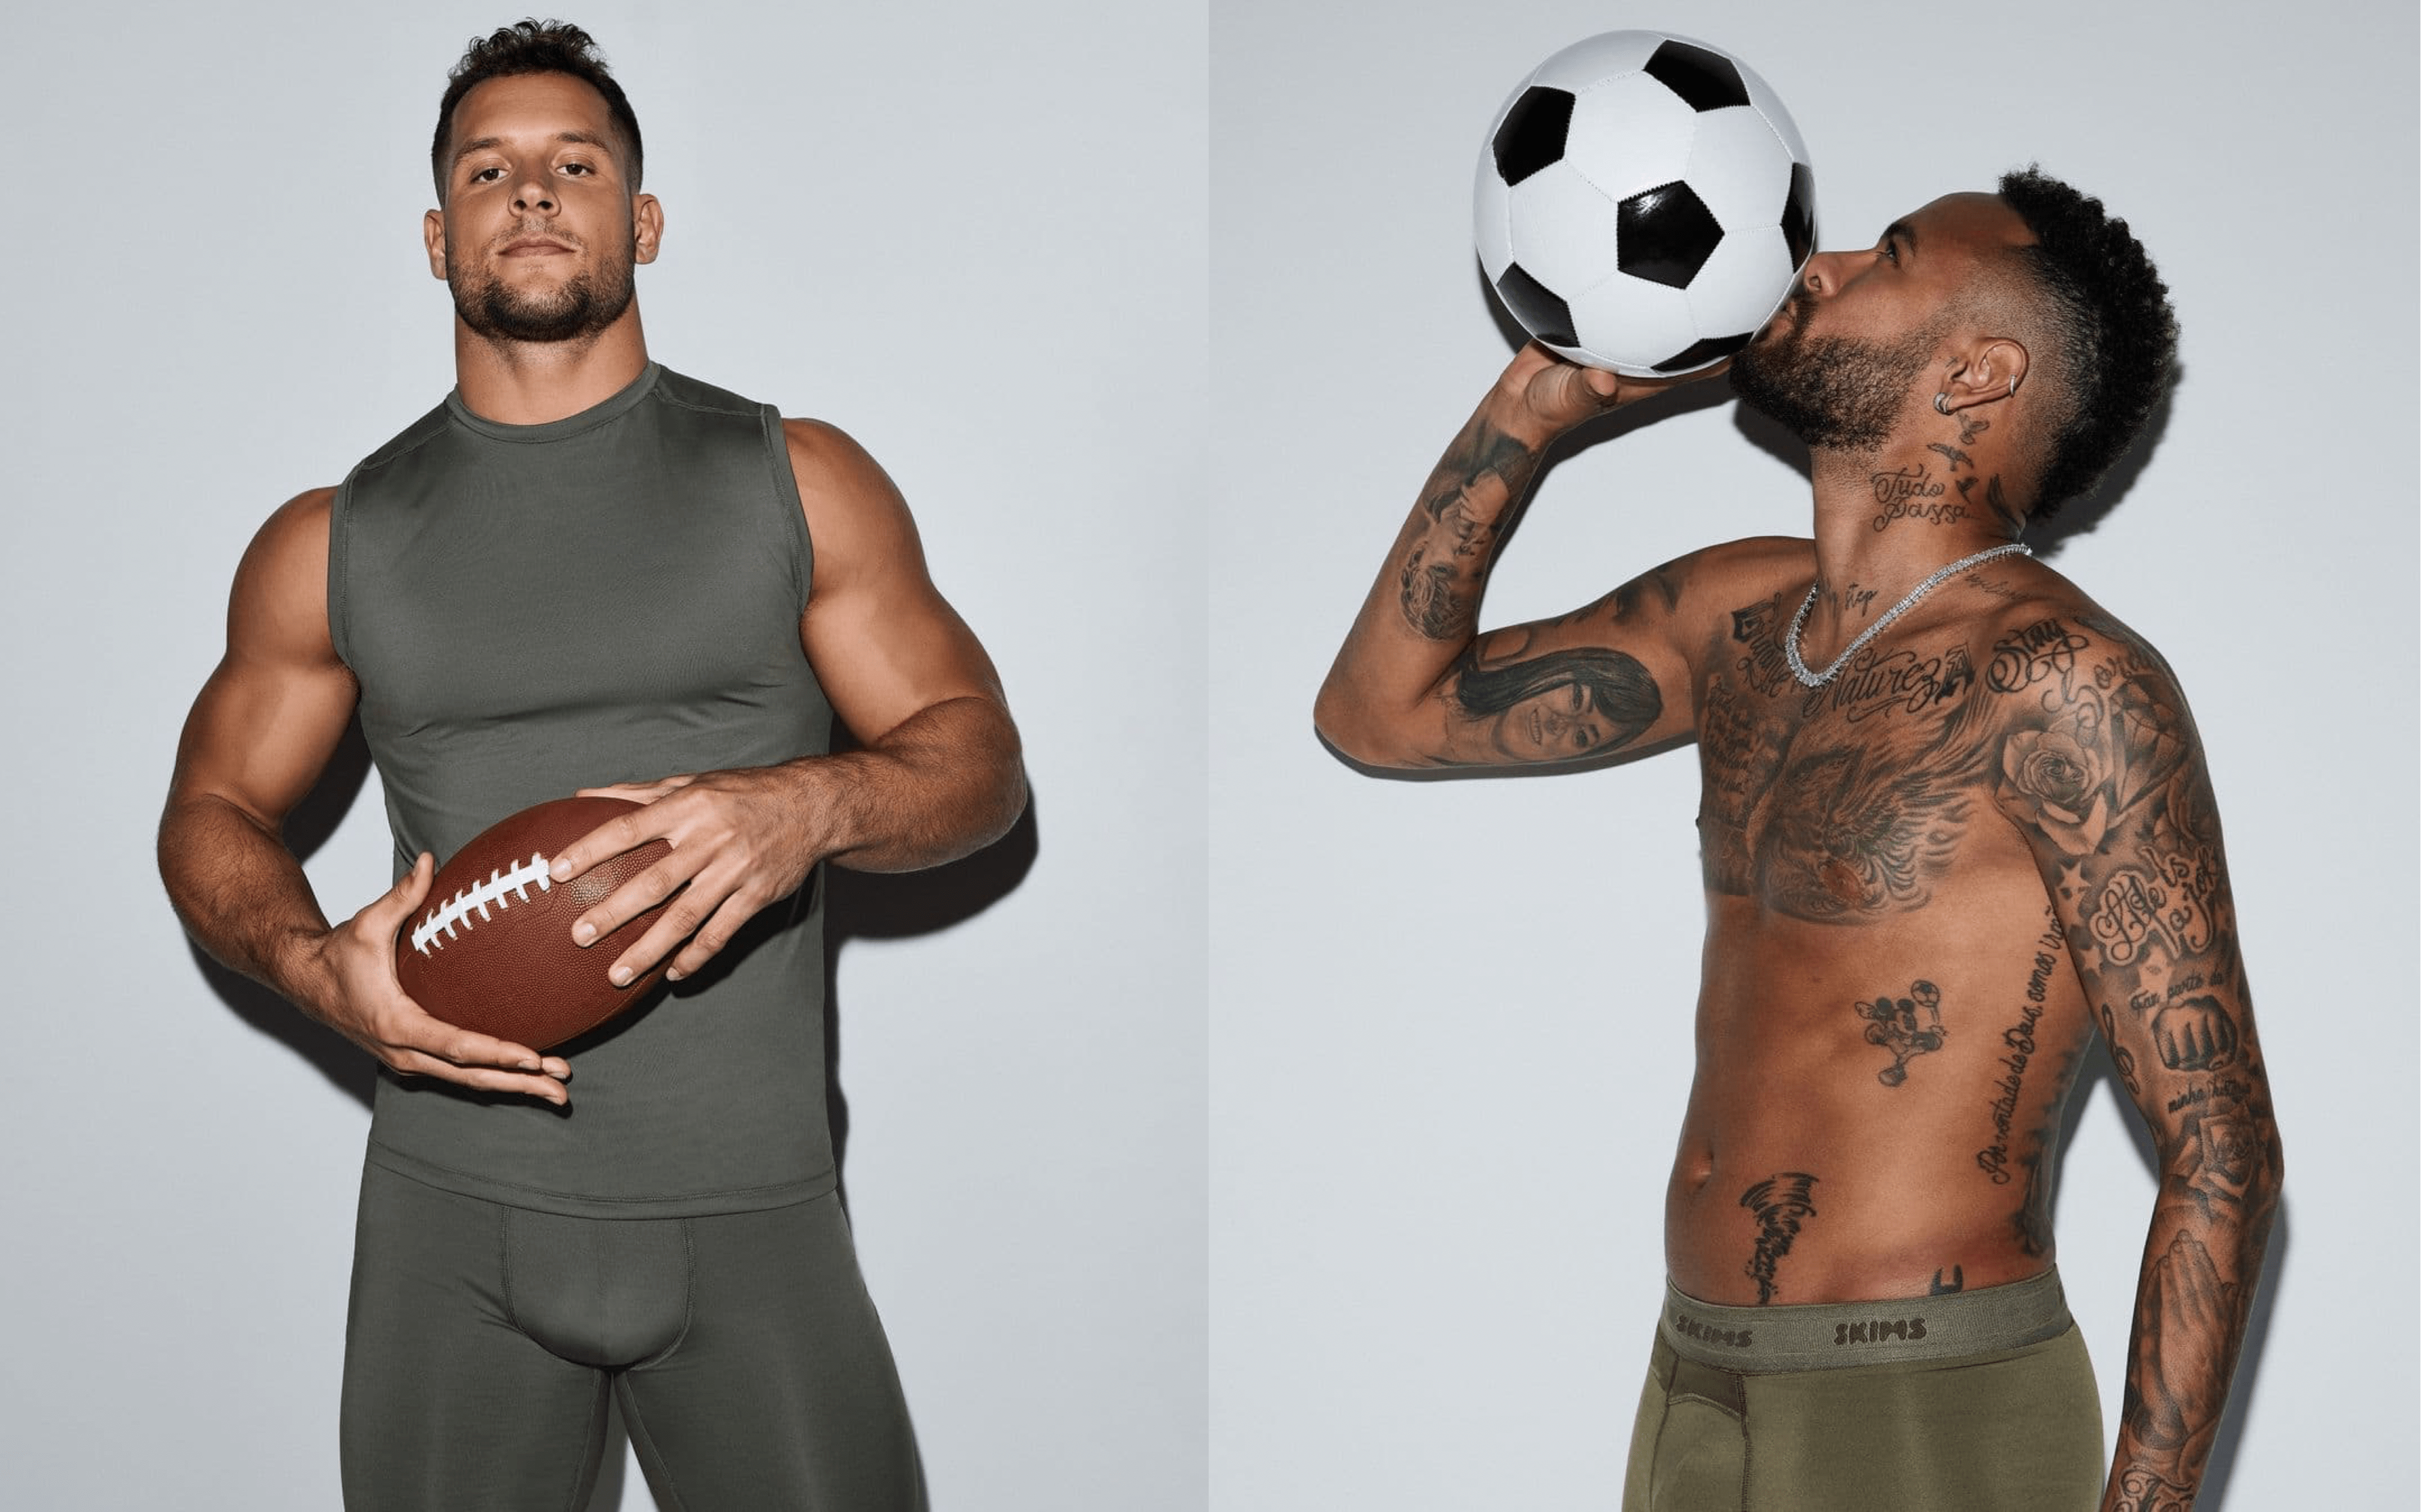 https://theimpression.com/wp-content/uploads/2023/10/Skims-Launches-Mens-Collection-with-Star-Studded-Athlete-Campaign.png